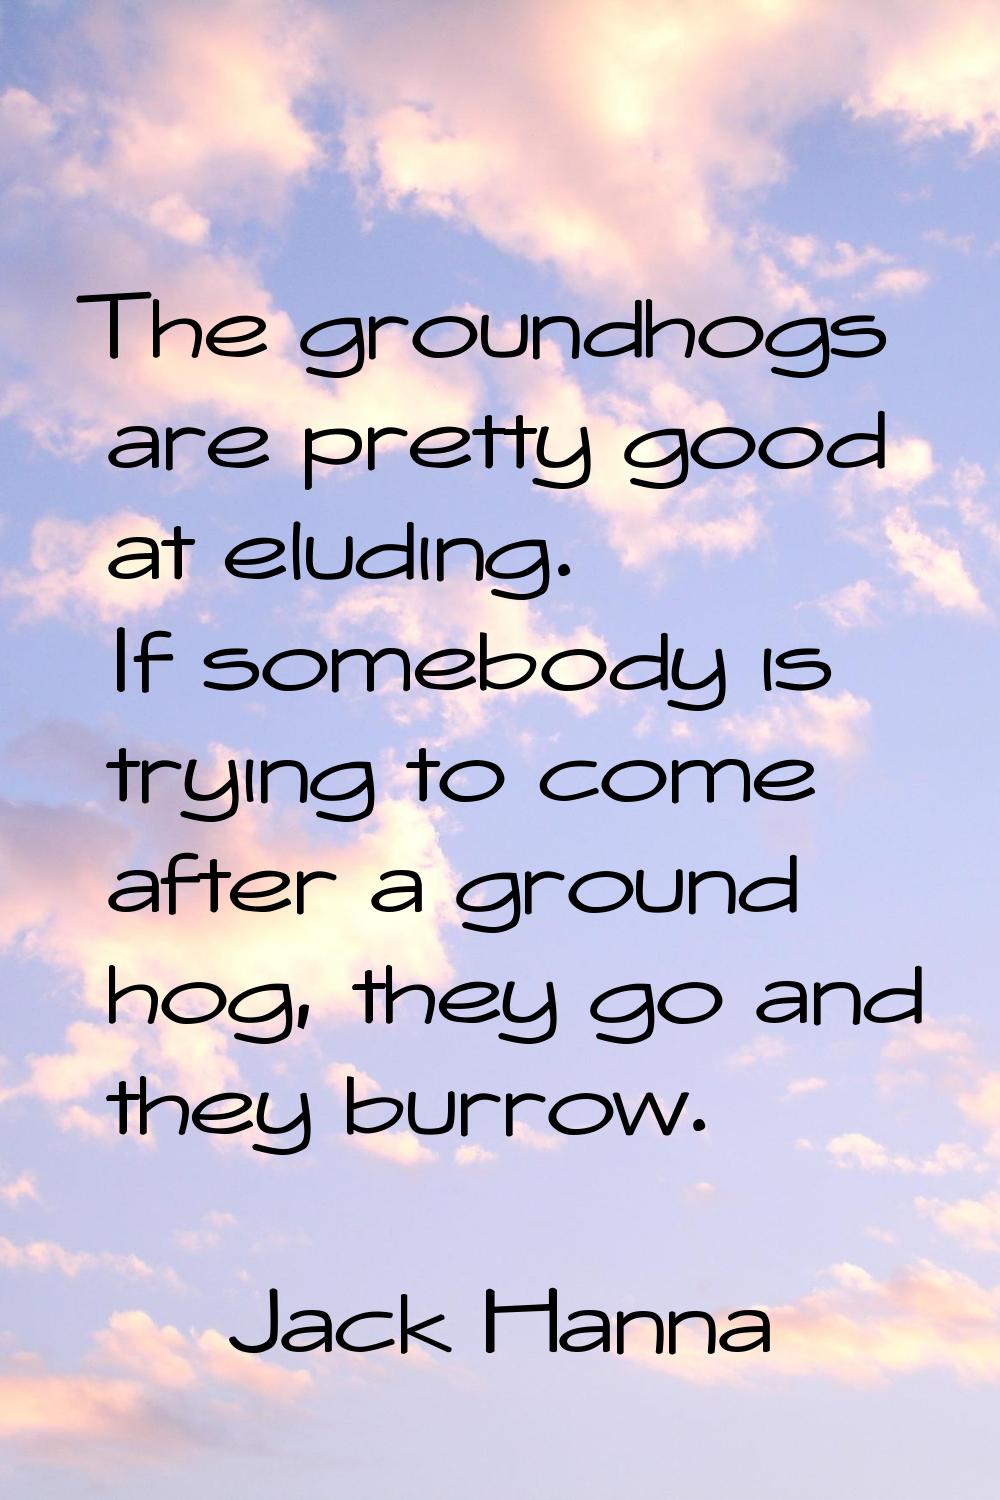 The groundhogs are pretty good at eluding. If somebody is trying to come after a ground hog, they g